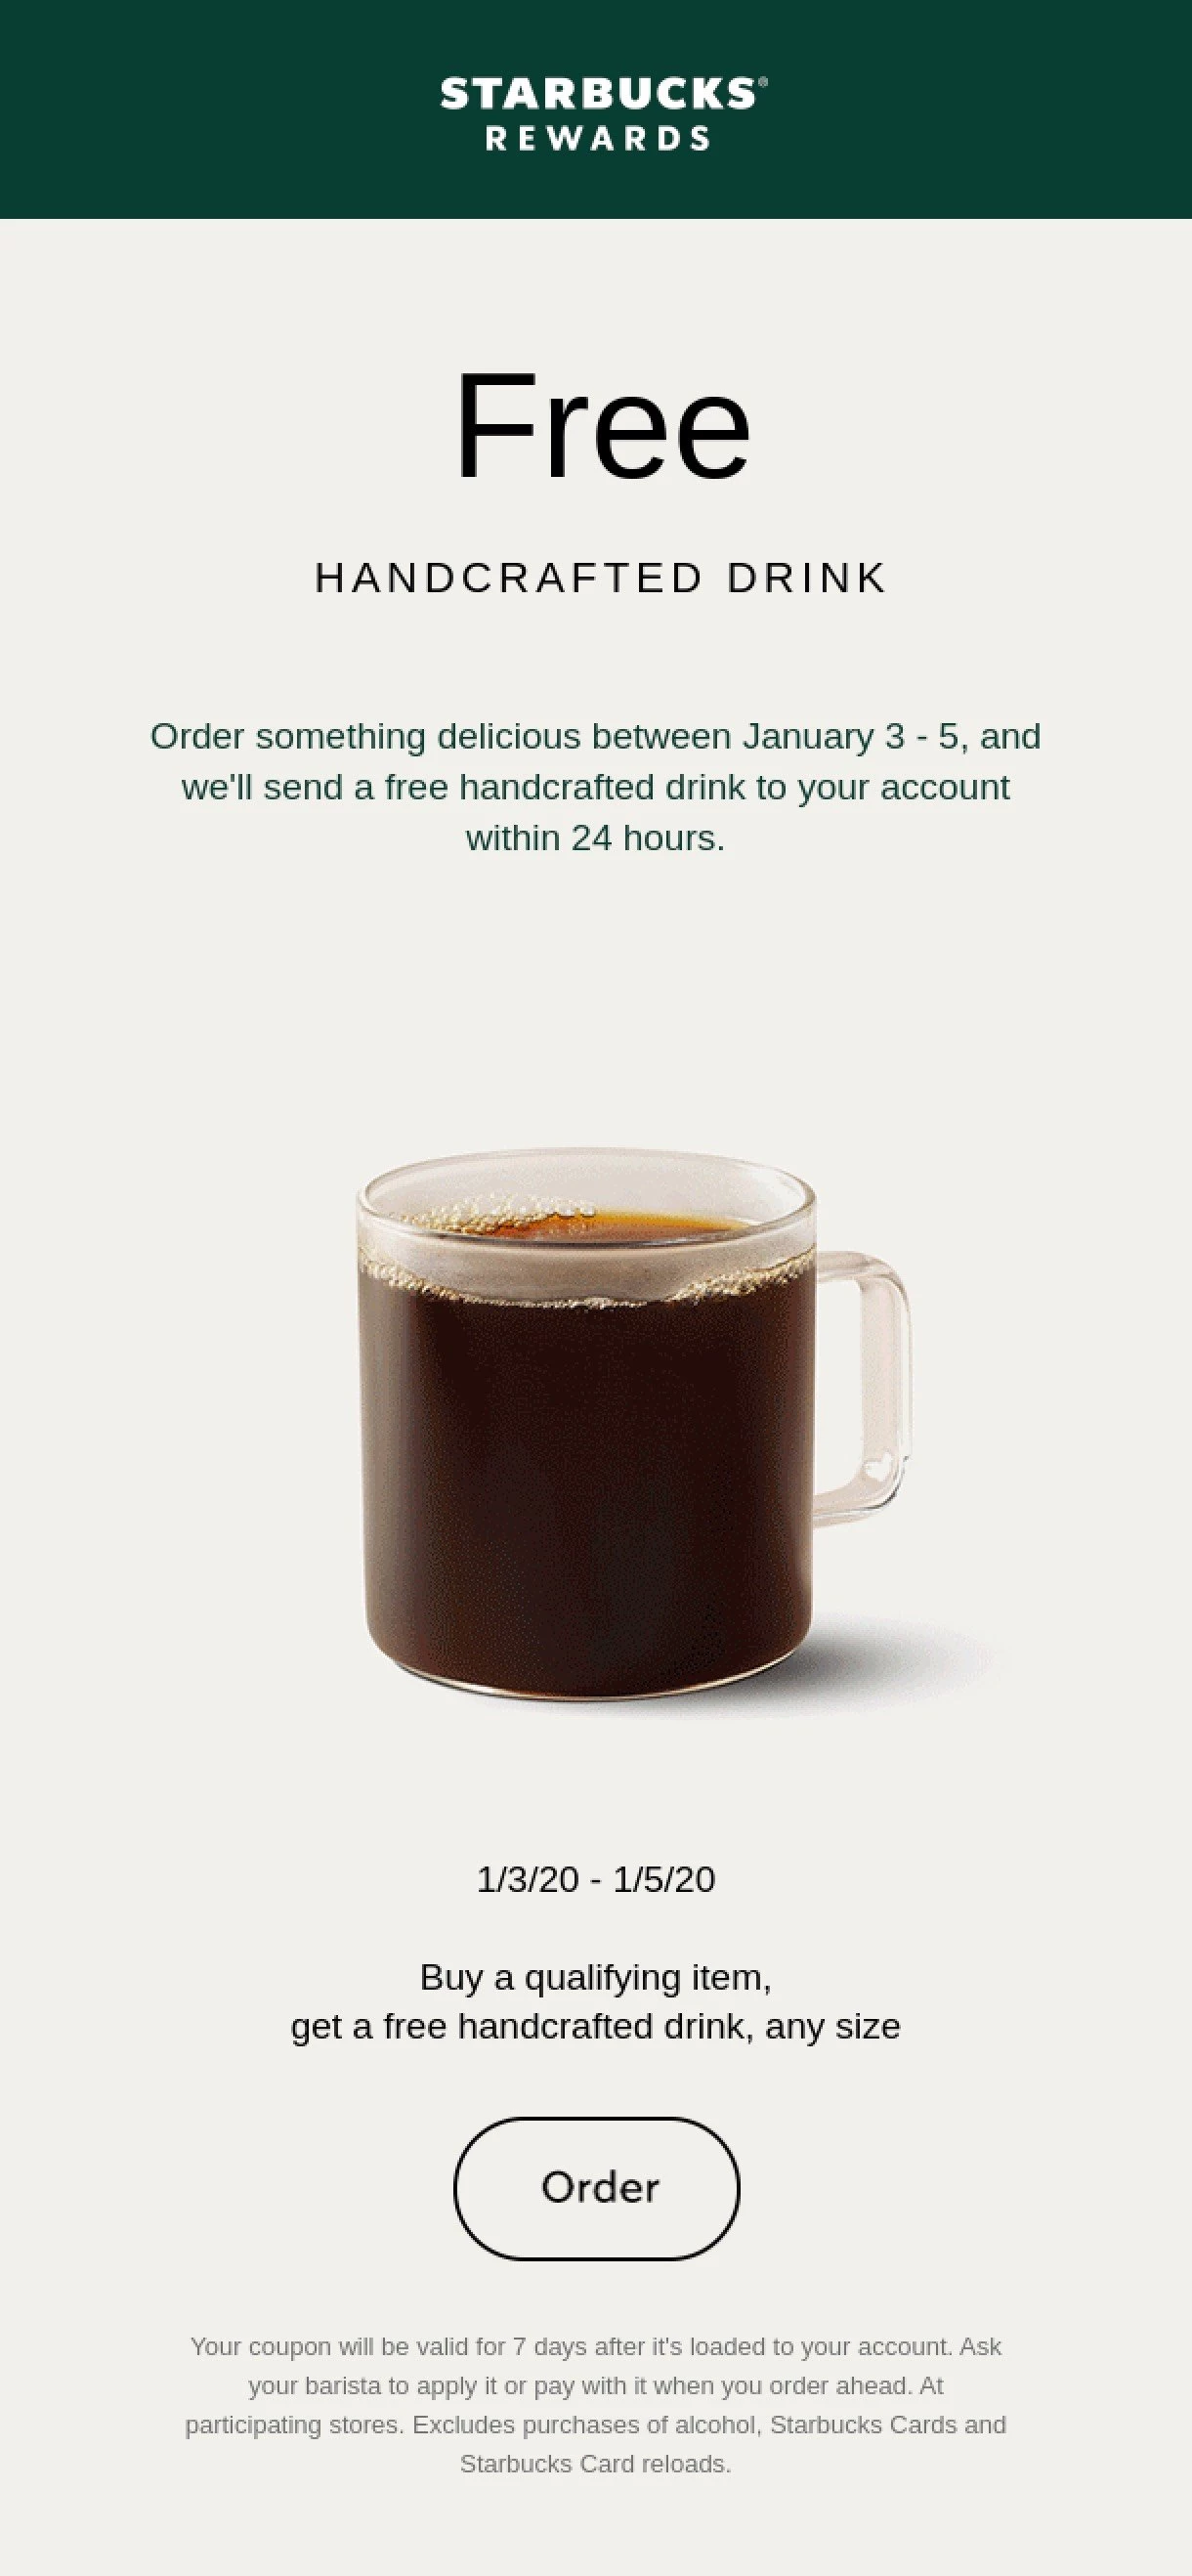 Email coupon by Starbucks